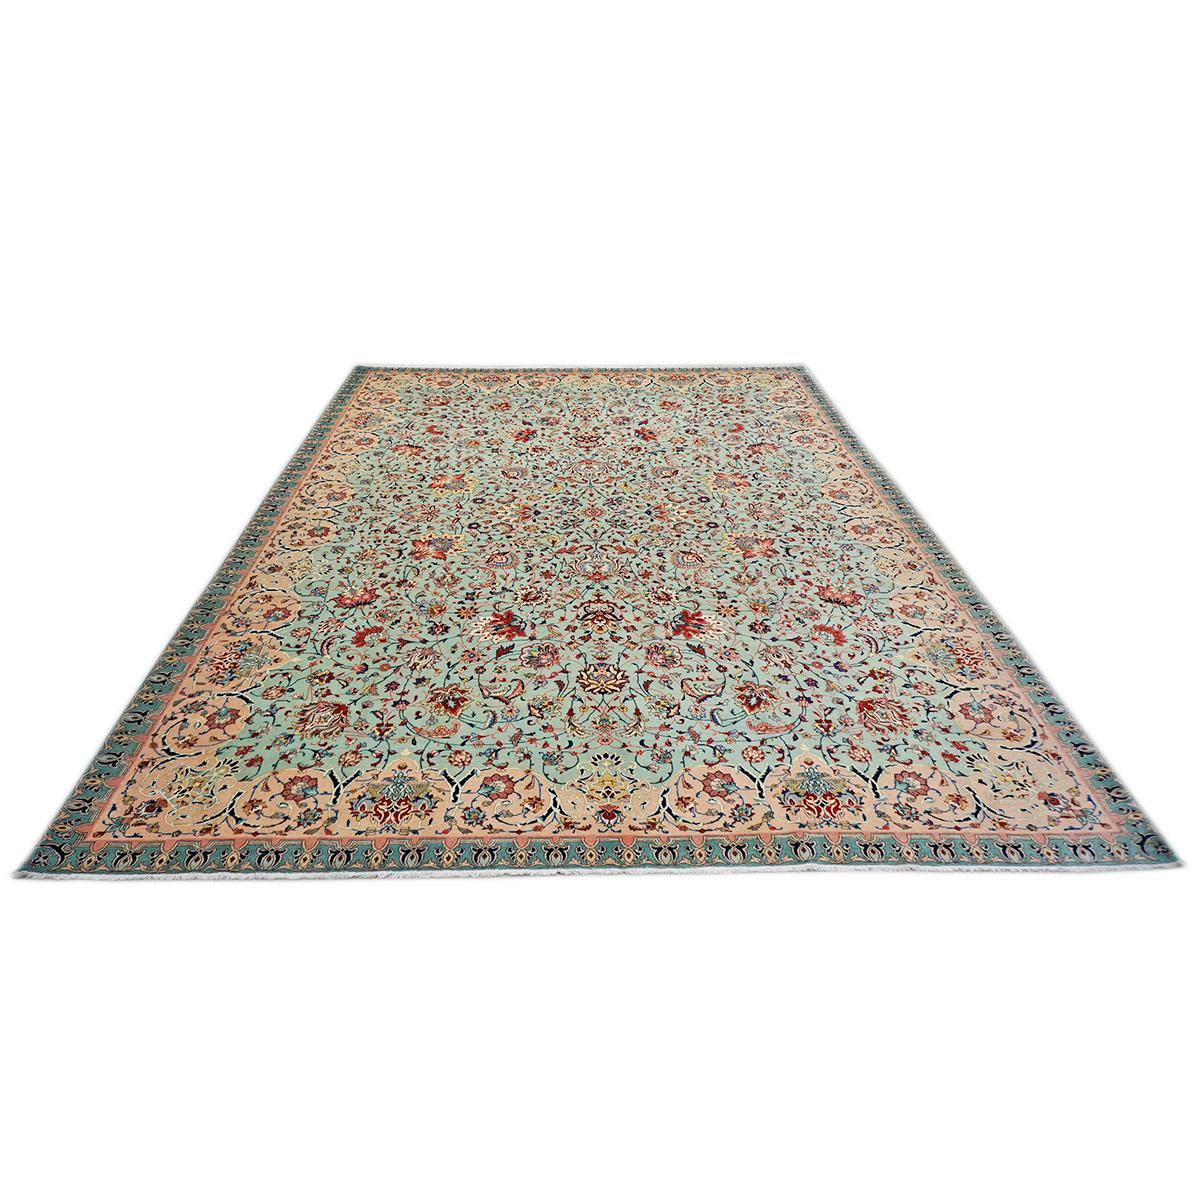 Antique Persian Tabriz Emad 9x12 Mint Green & Pink Handmade Area Rug In Good Condition For Sale In Houston, TX